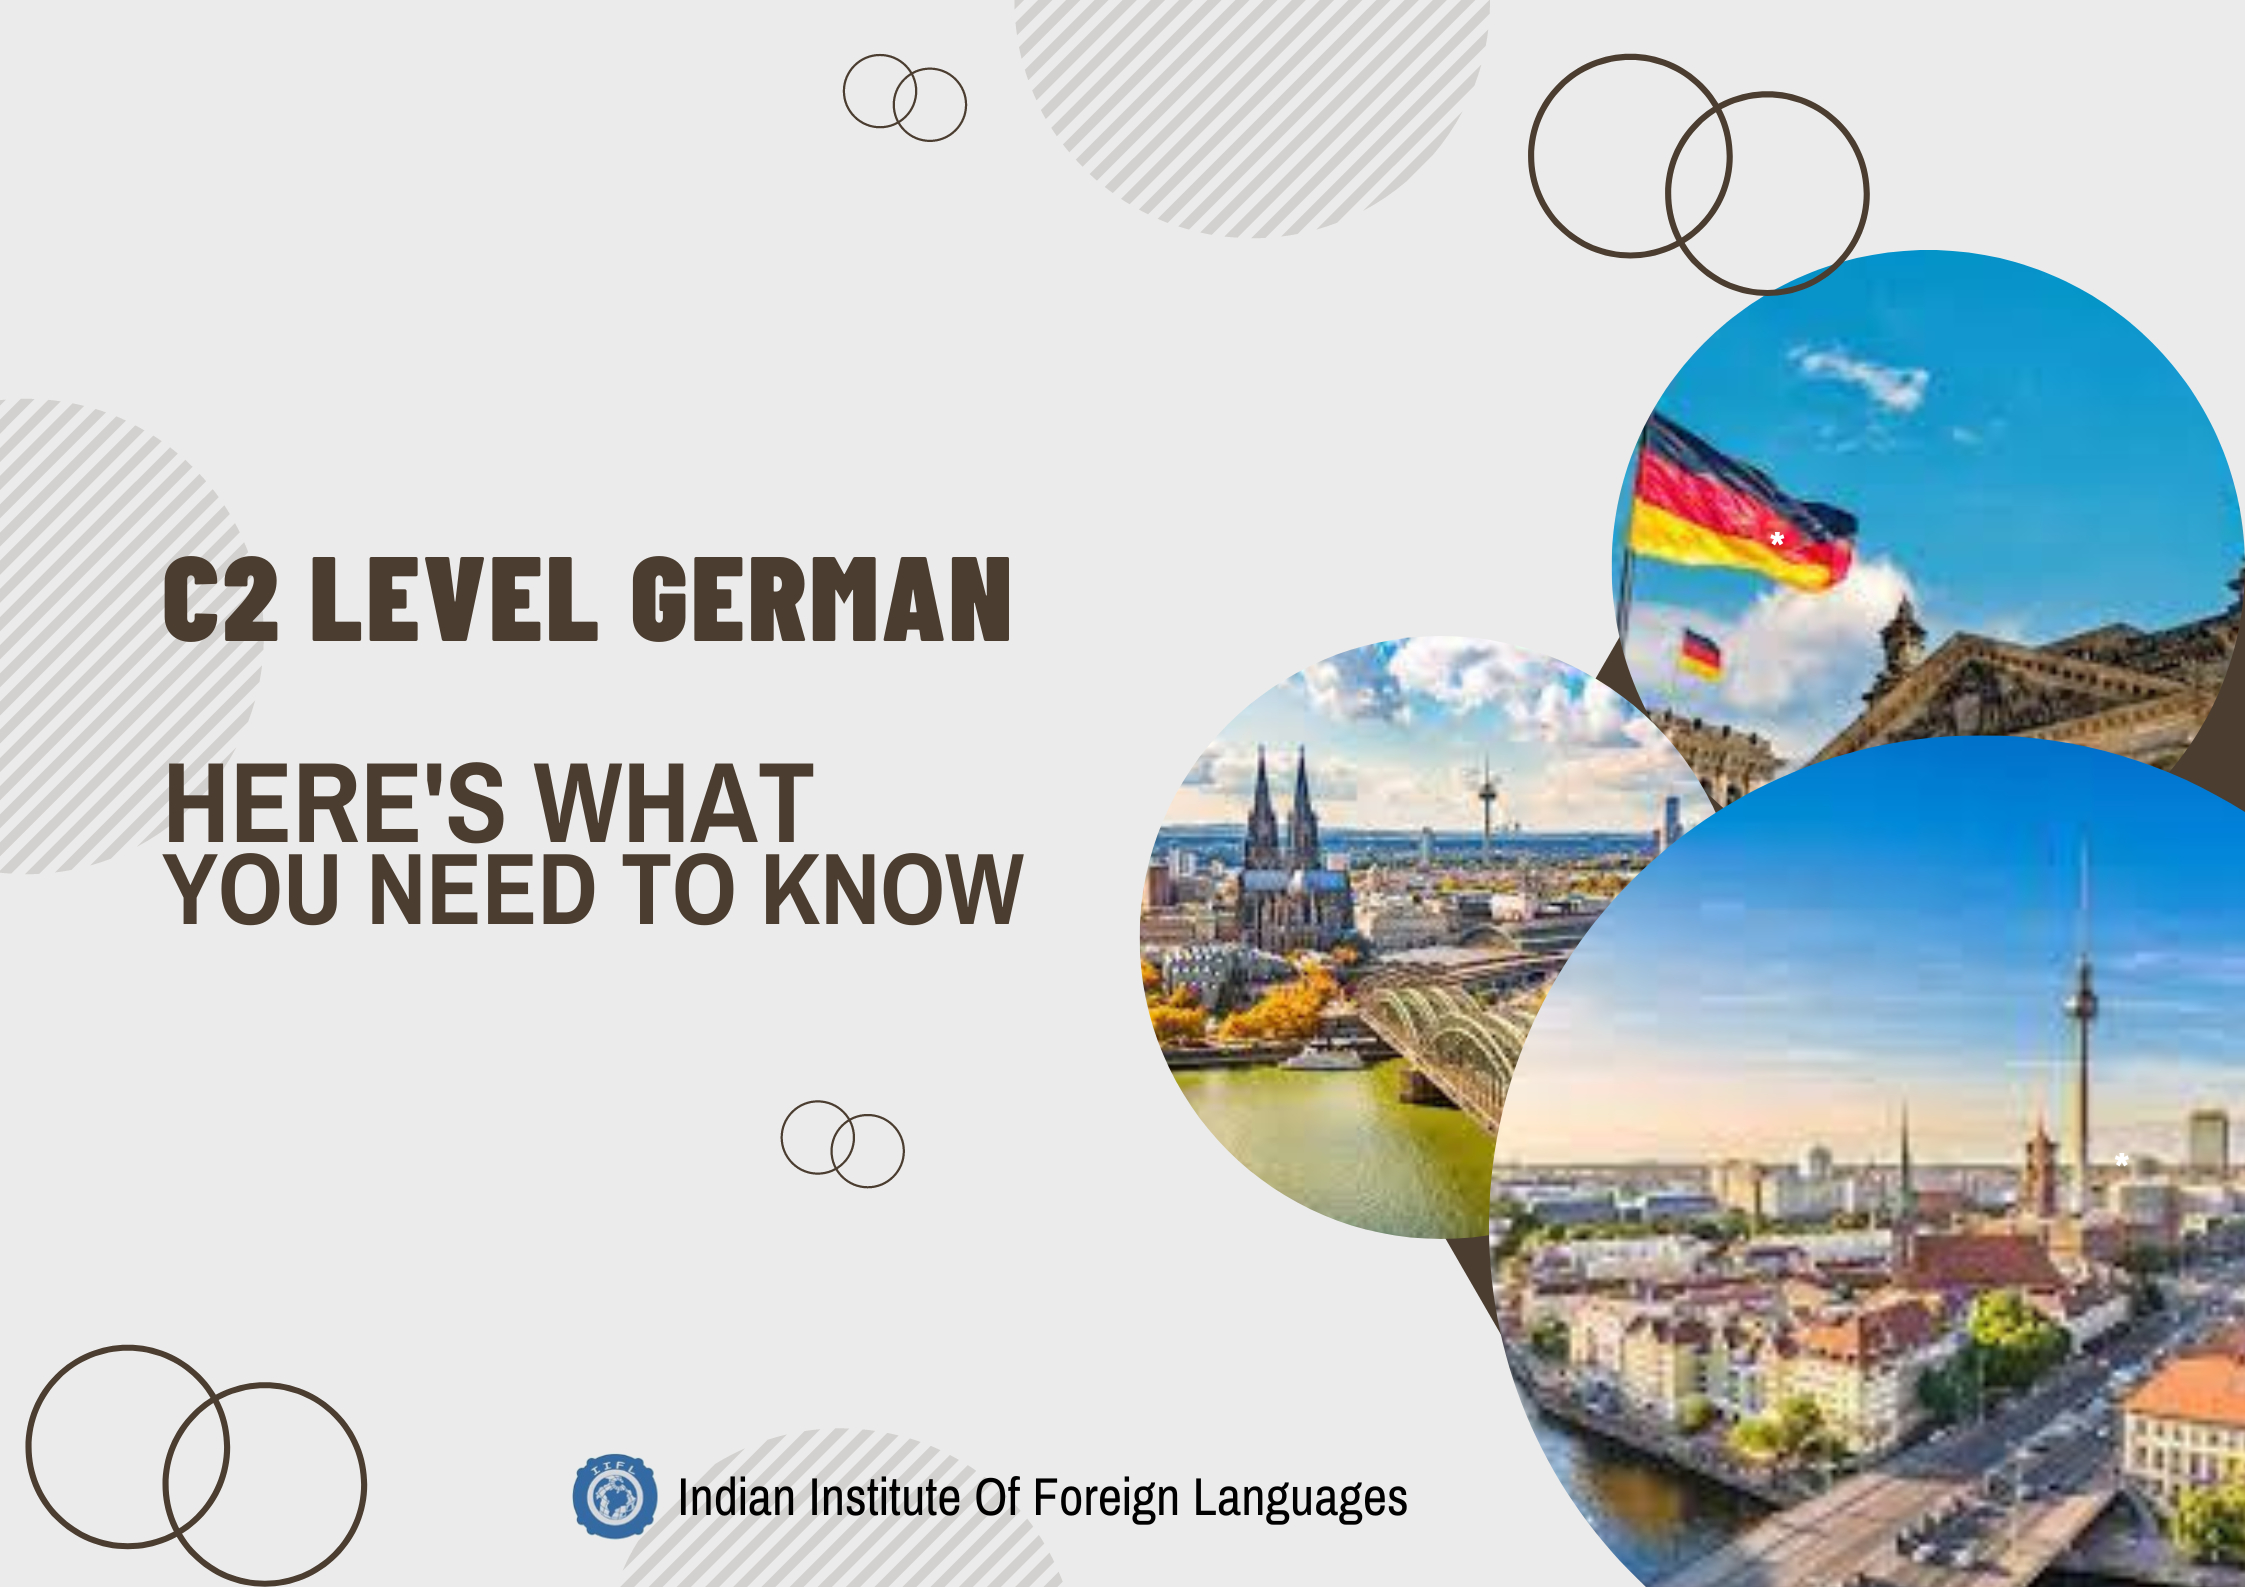 C2 level German – Here’s what you need to know